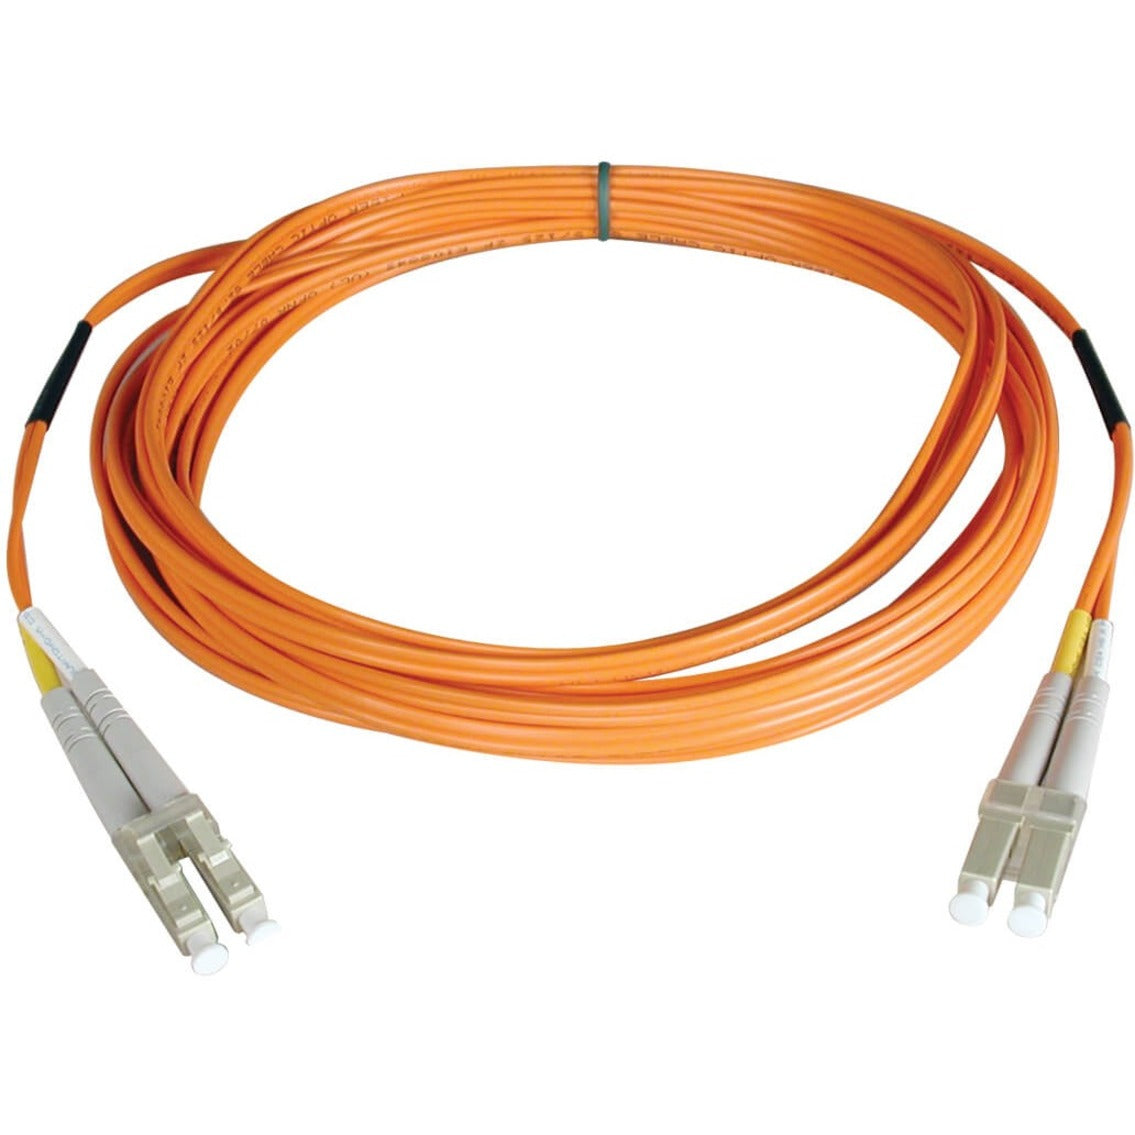 Tripp Lite N520-100M Fiber Optic Duplex Patch Cable, 328.10 ft, LC/LC 50/125 Fiber, Use on Fiber and Fibre Channel Installations